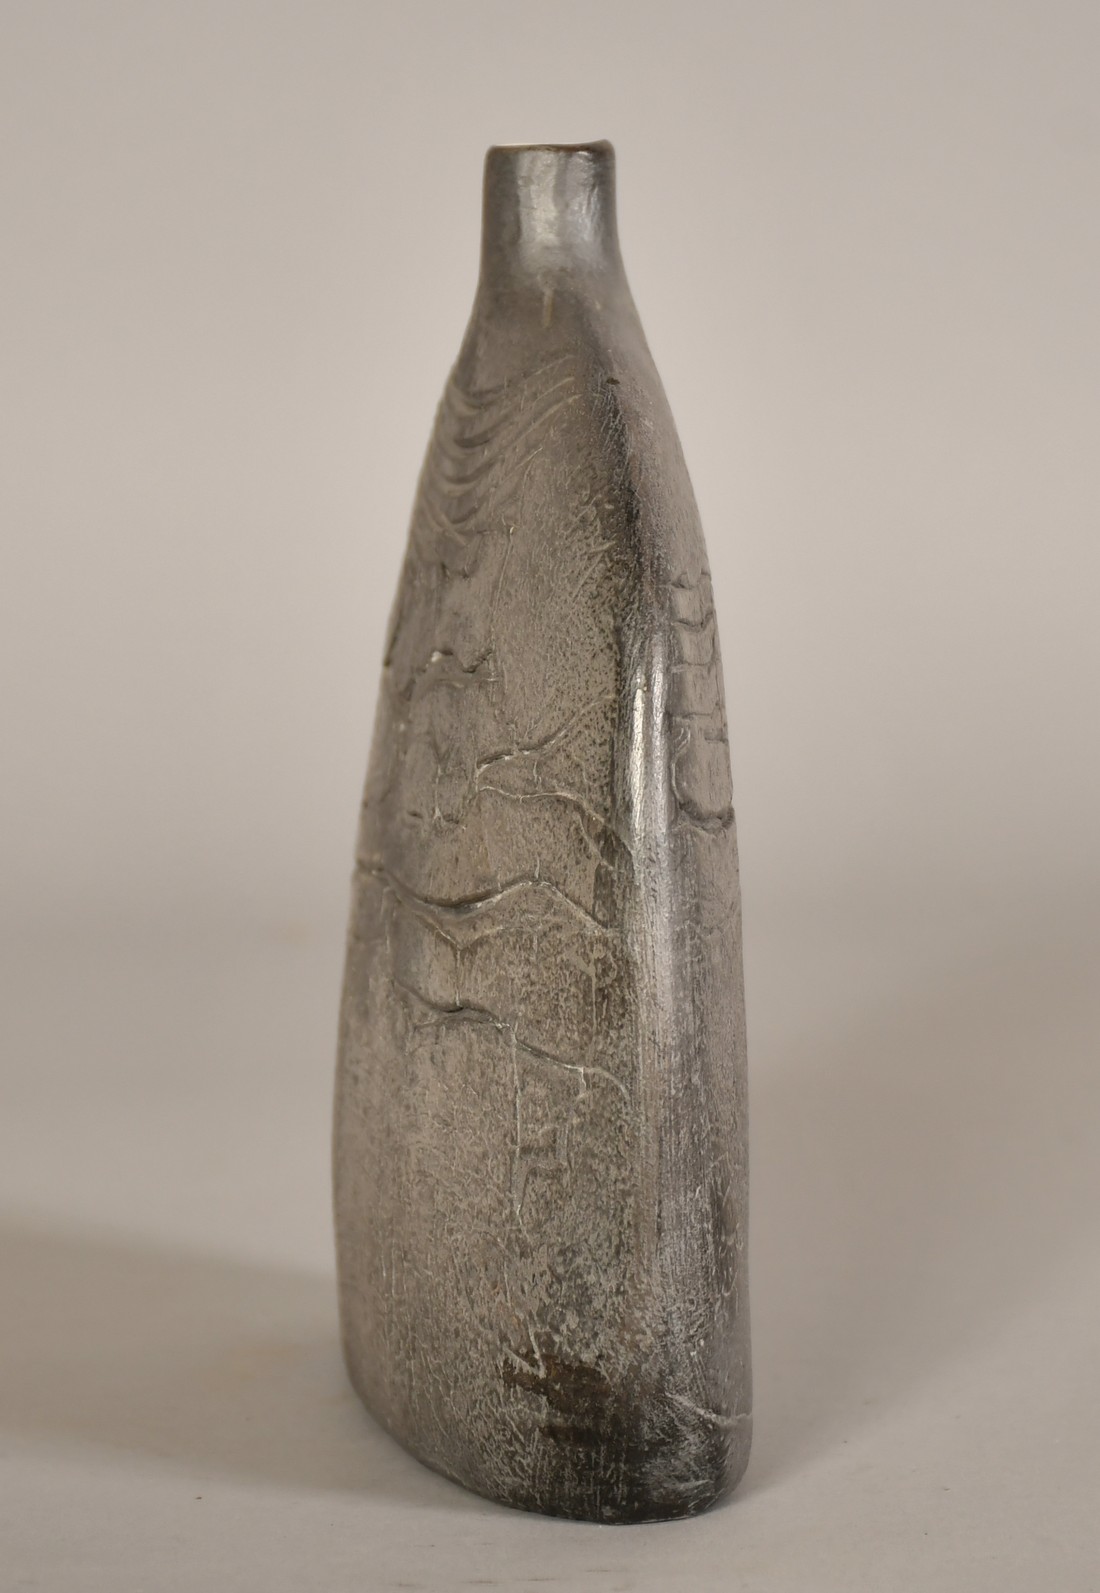 A studio pottery flattened vase with a textured metallic style finish, 7" (18cm) high. - Image 3 of 4